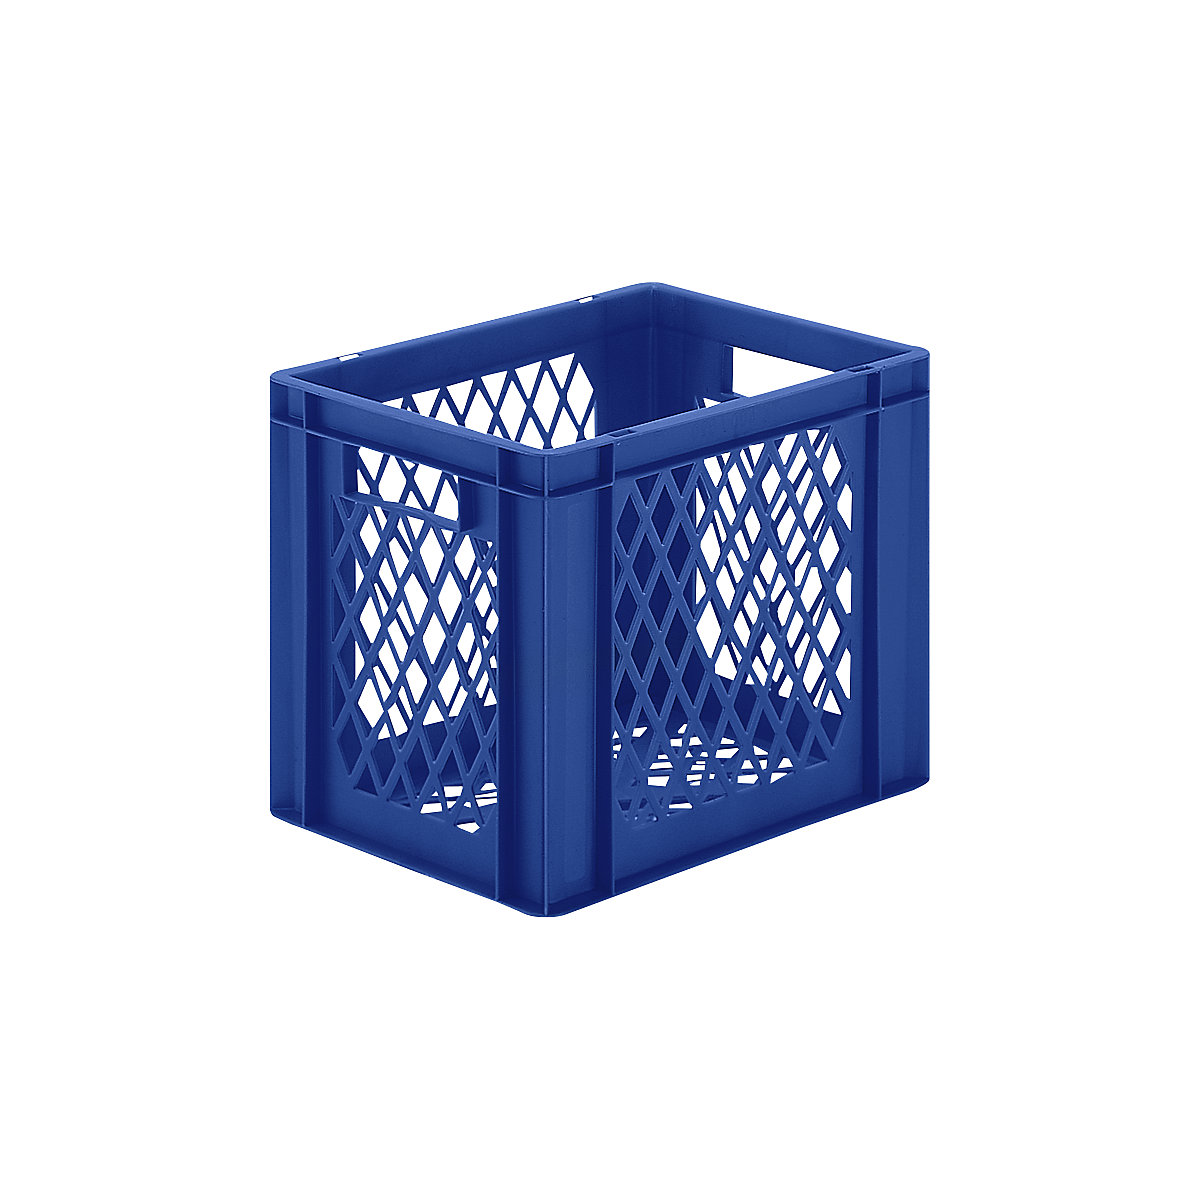 Euro stacking container, perforated walls and base, LxWxH 400 x 300 x 320 mm, blue, pack of 5-7